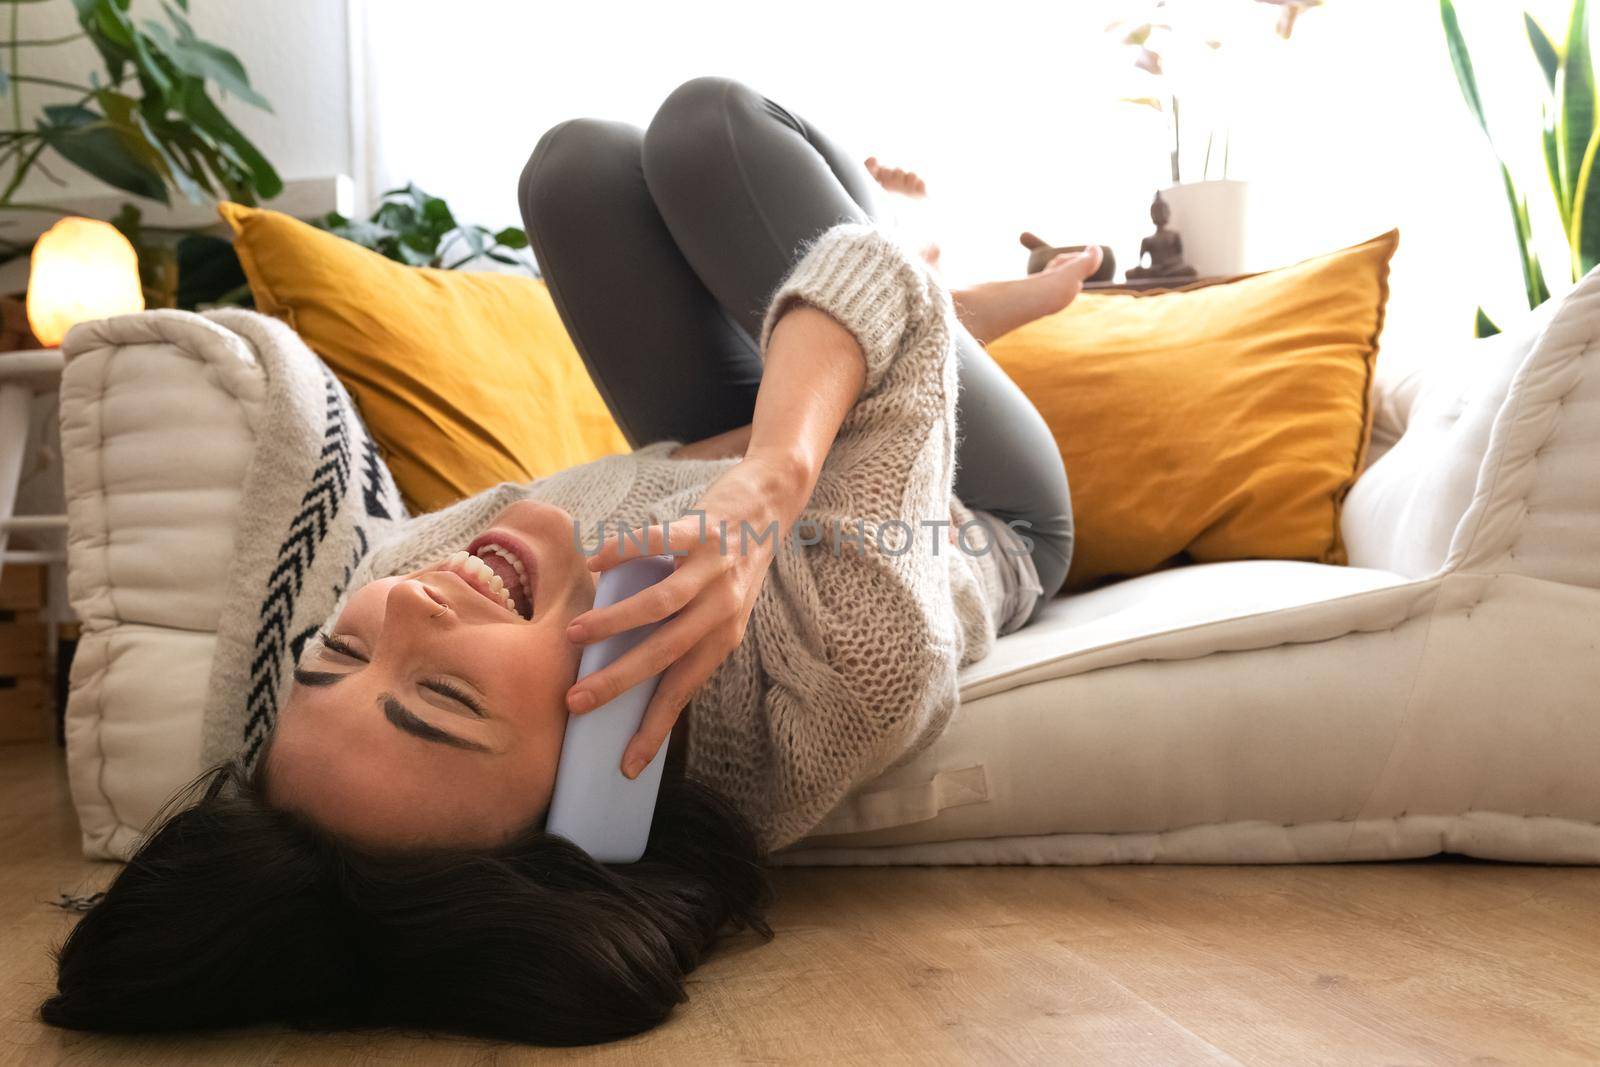 Happy young caucasian woman lying upside down on the couch talking on cellphone laughing. Copy space. Happiness concept.